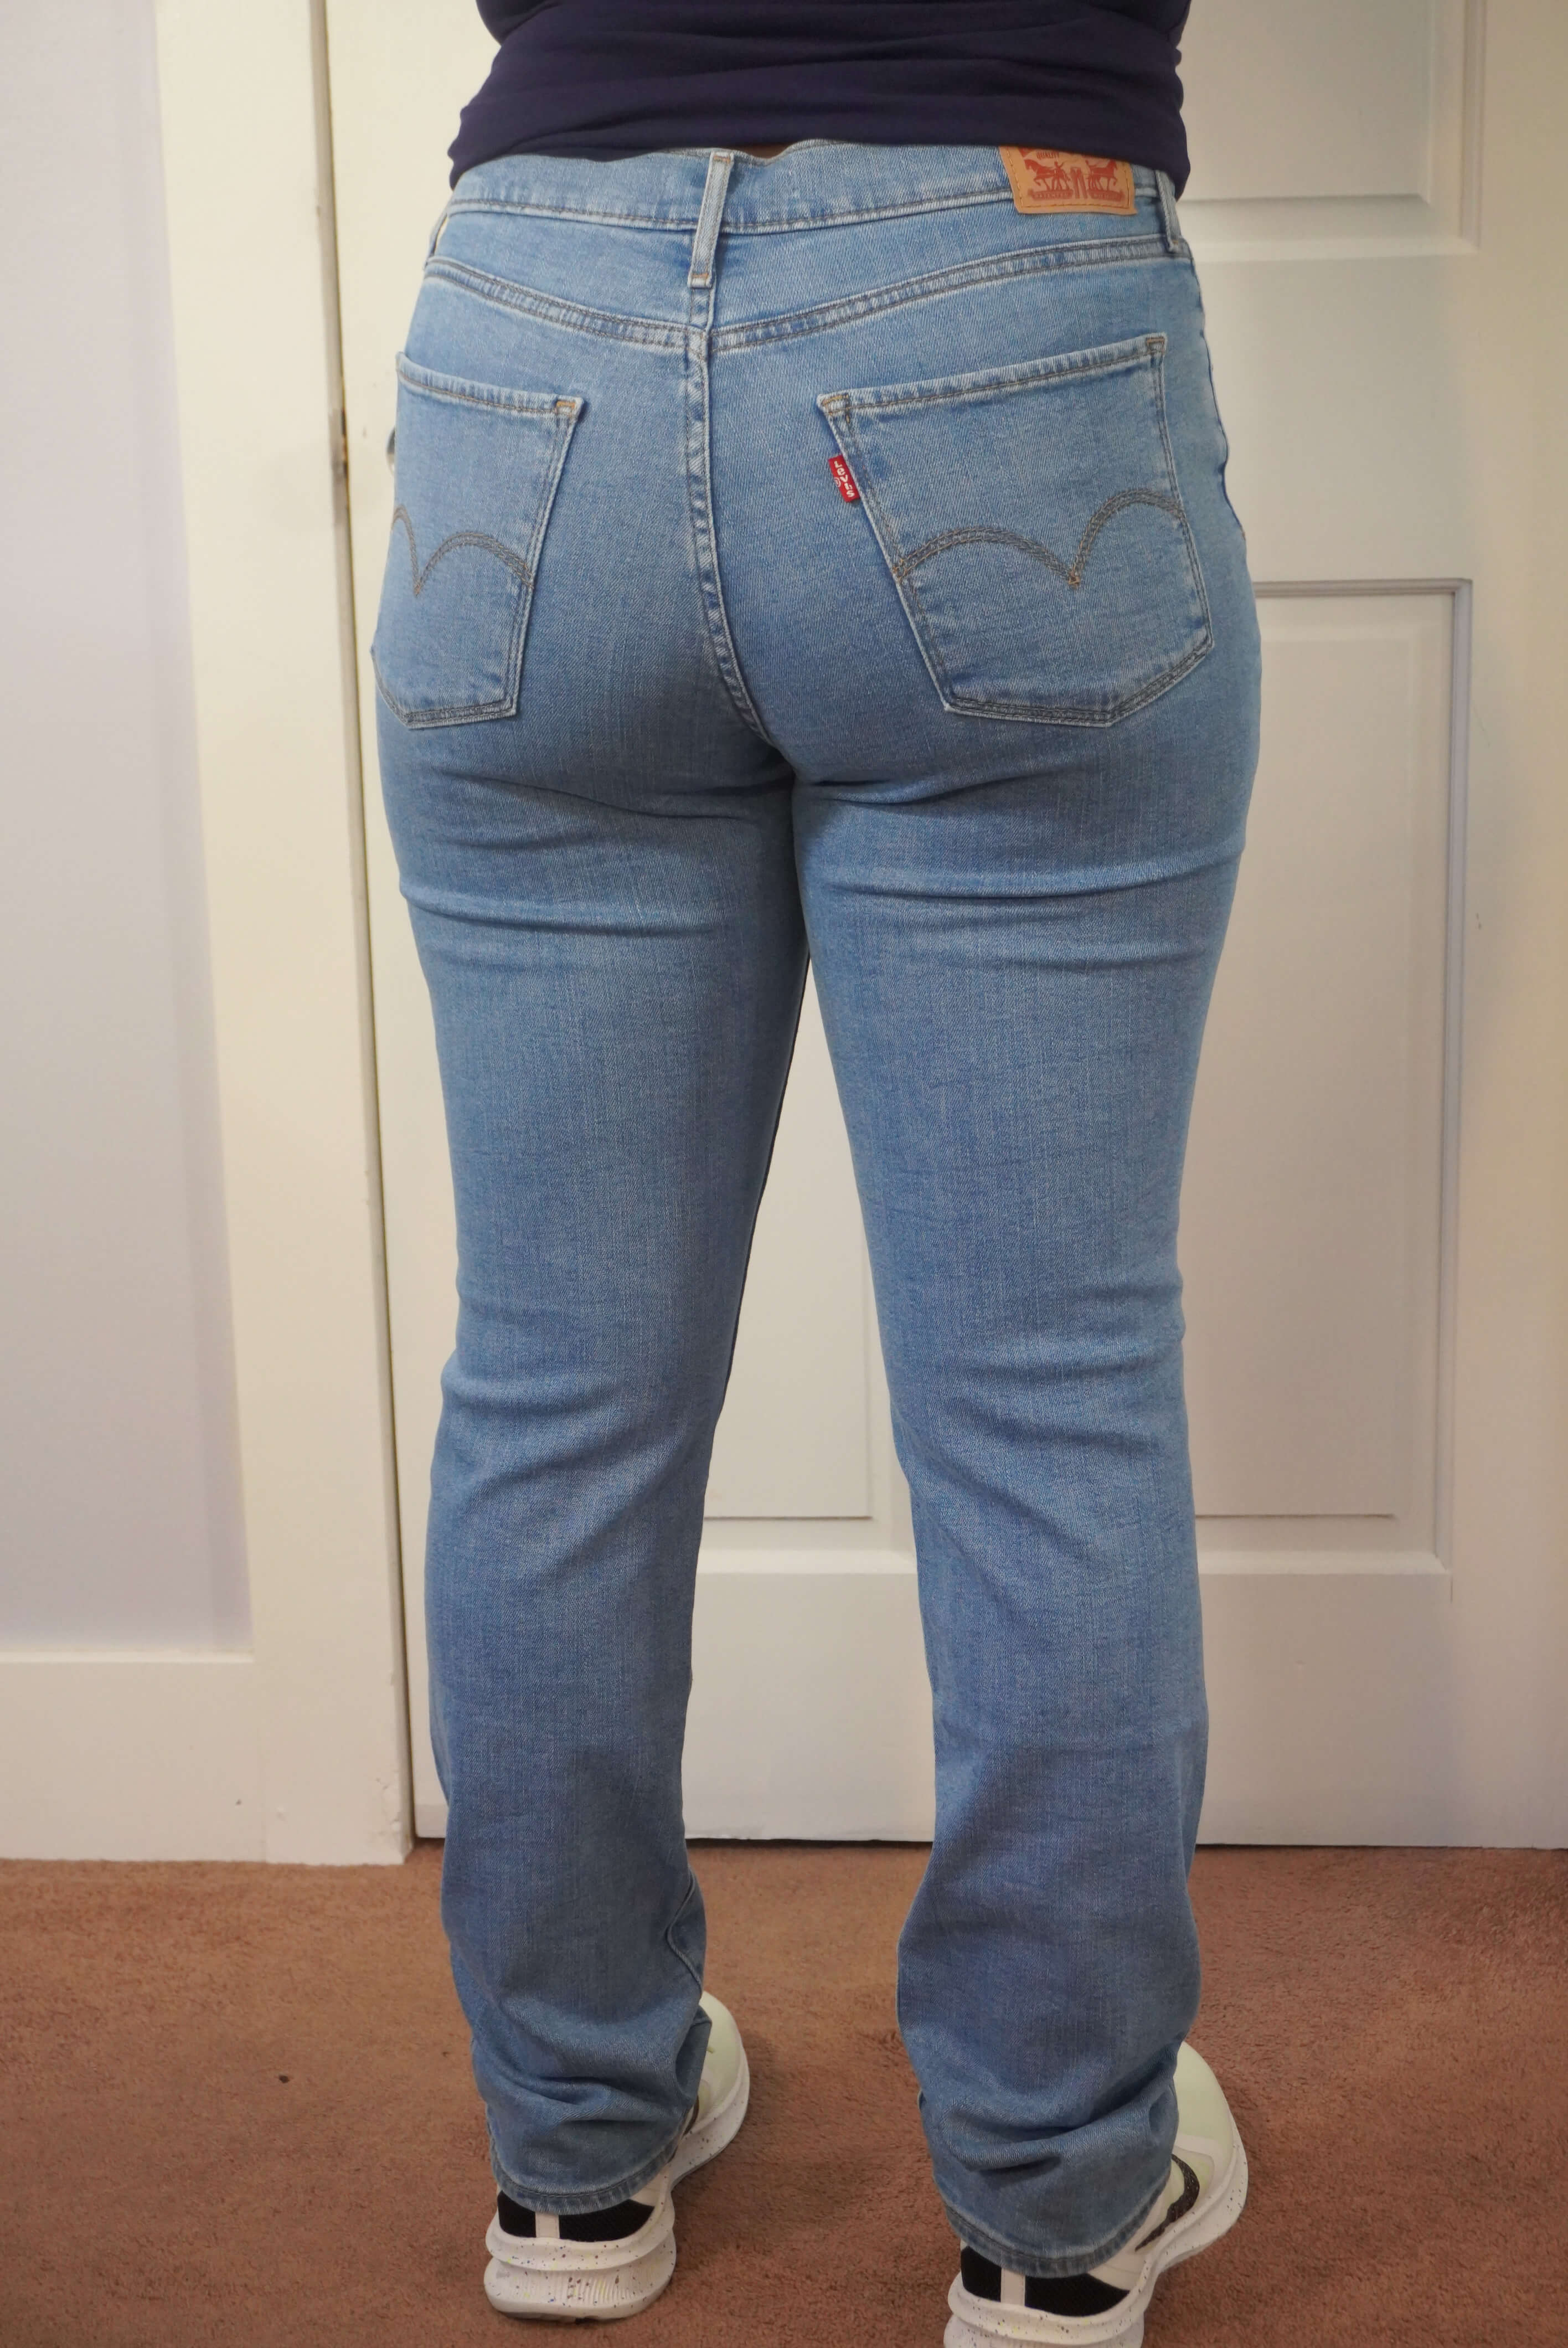 This image shows a back view of the Levi's 724 jeans. The back pockets and waistline fit are displayed.